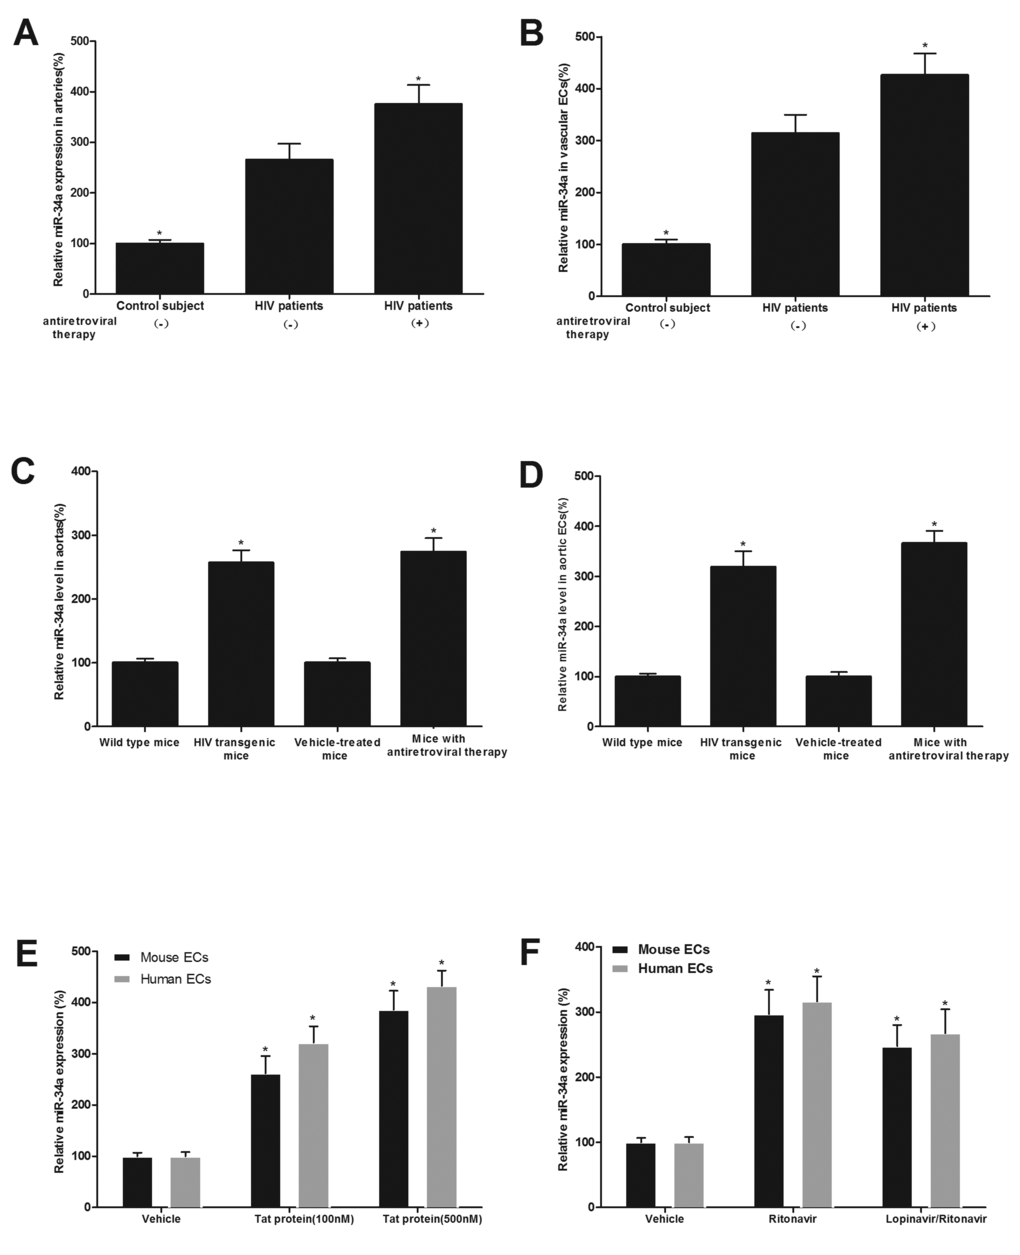 miR-34a expression is significantly increased in both HIV-infected, and antiretroviral agents, ritonavir and lopinavir-treated human and mouse vessels and vascular ECs both in vitro and in vivo. miR-34a expression in arterial vessels (A) and in ECs isolated from these vessels (B) in HIV-infected patients with and without antiretroviral therapy (lopinavir/ritonavir, 800/200mg daily dose) and in their controls. miR-34a expression arterial vessels (C) and in ECs isolated from these vessels (D) in HIV-1 Tat transgenic mice and in mice with antiretroviral therapy (lopinavir/ritonavir, 125/31.25 mg/kg daily dose), as well as their controls. The effects of Tat1-101 (E), ritonavir or lopinavir plus ritonavir (lopinavir/ritonavir) (F) on the expression of miR-34a in human and mouse ECs. Note: n=6-9; *pA) and (B), with the groups from wild-type mice or vehicle treated mice in (C) and (D), and with vehicle-treated groups in (E) and (F).